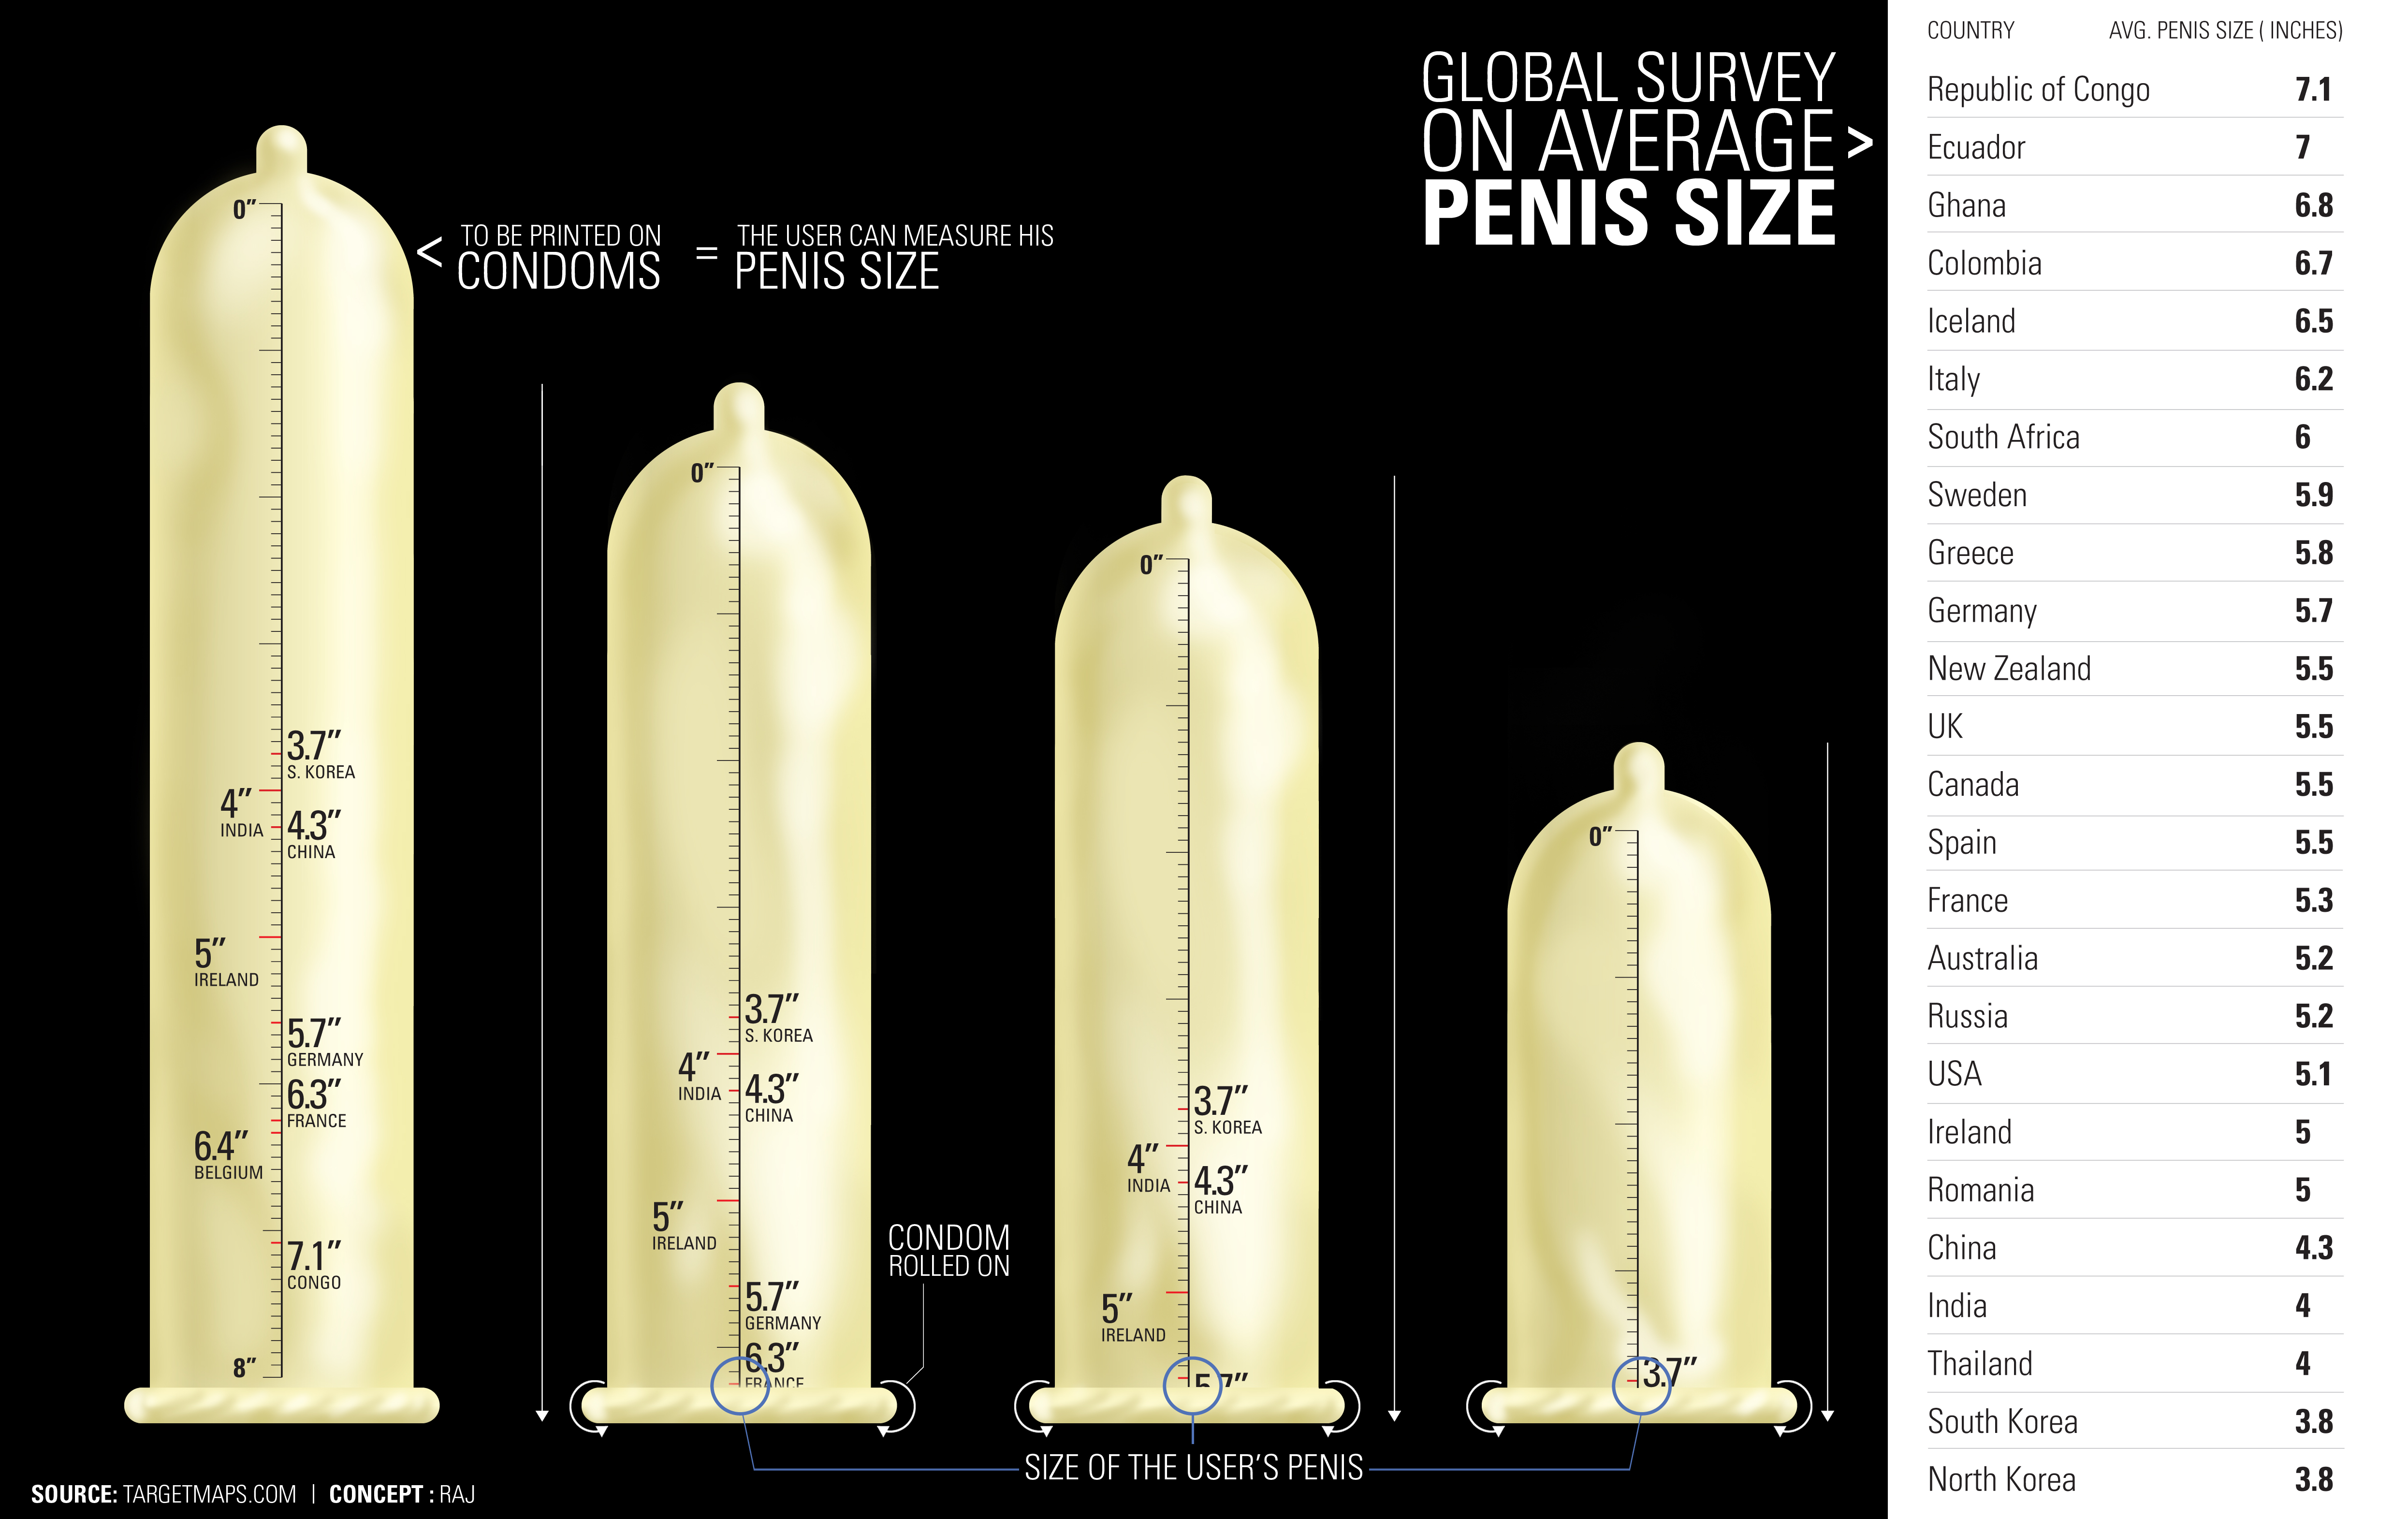 The world penis size map has been invented and it shows how the average manhood measures up